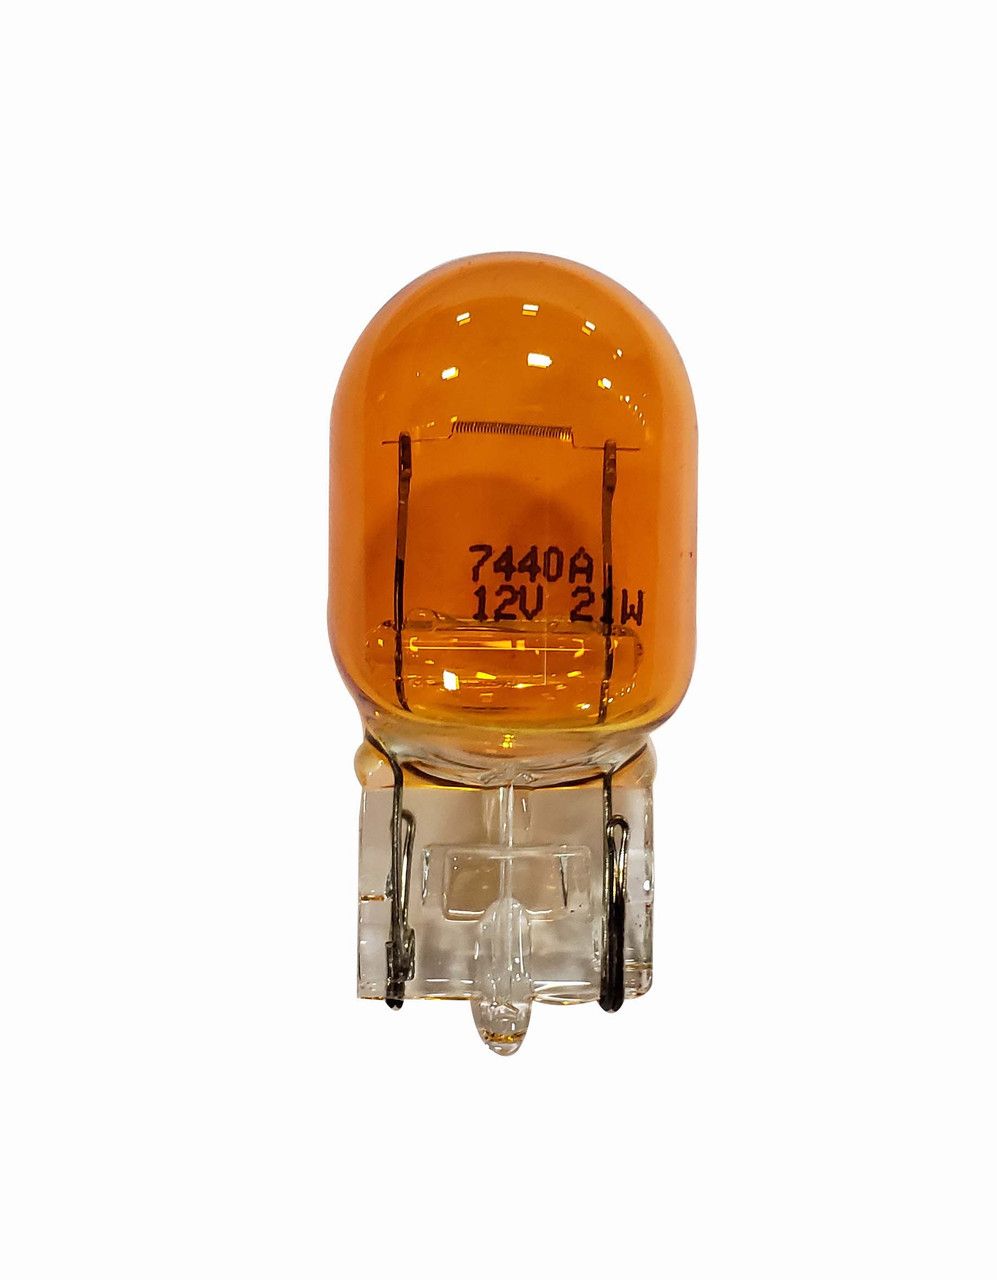 Amber Turn Signal Lamp Bulb - Rear - Replacement For No. 7440A